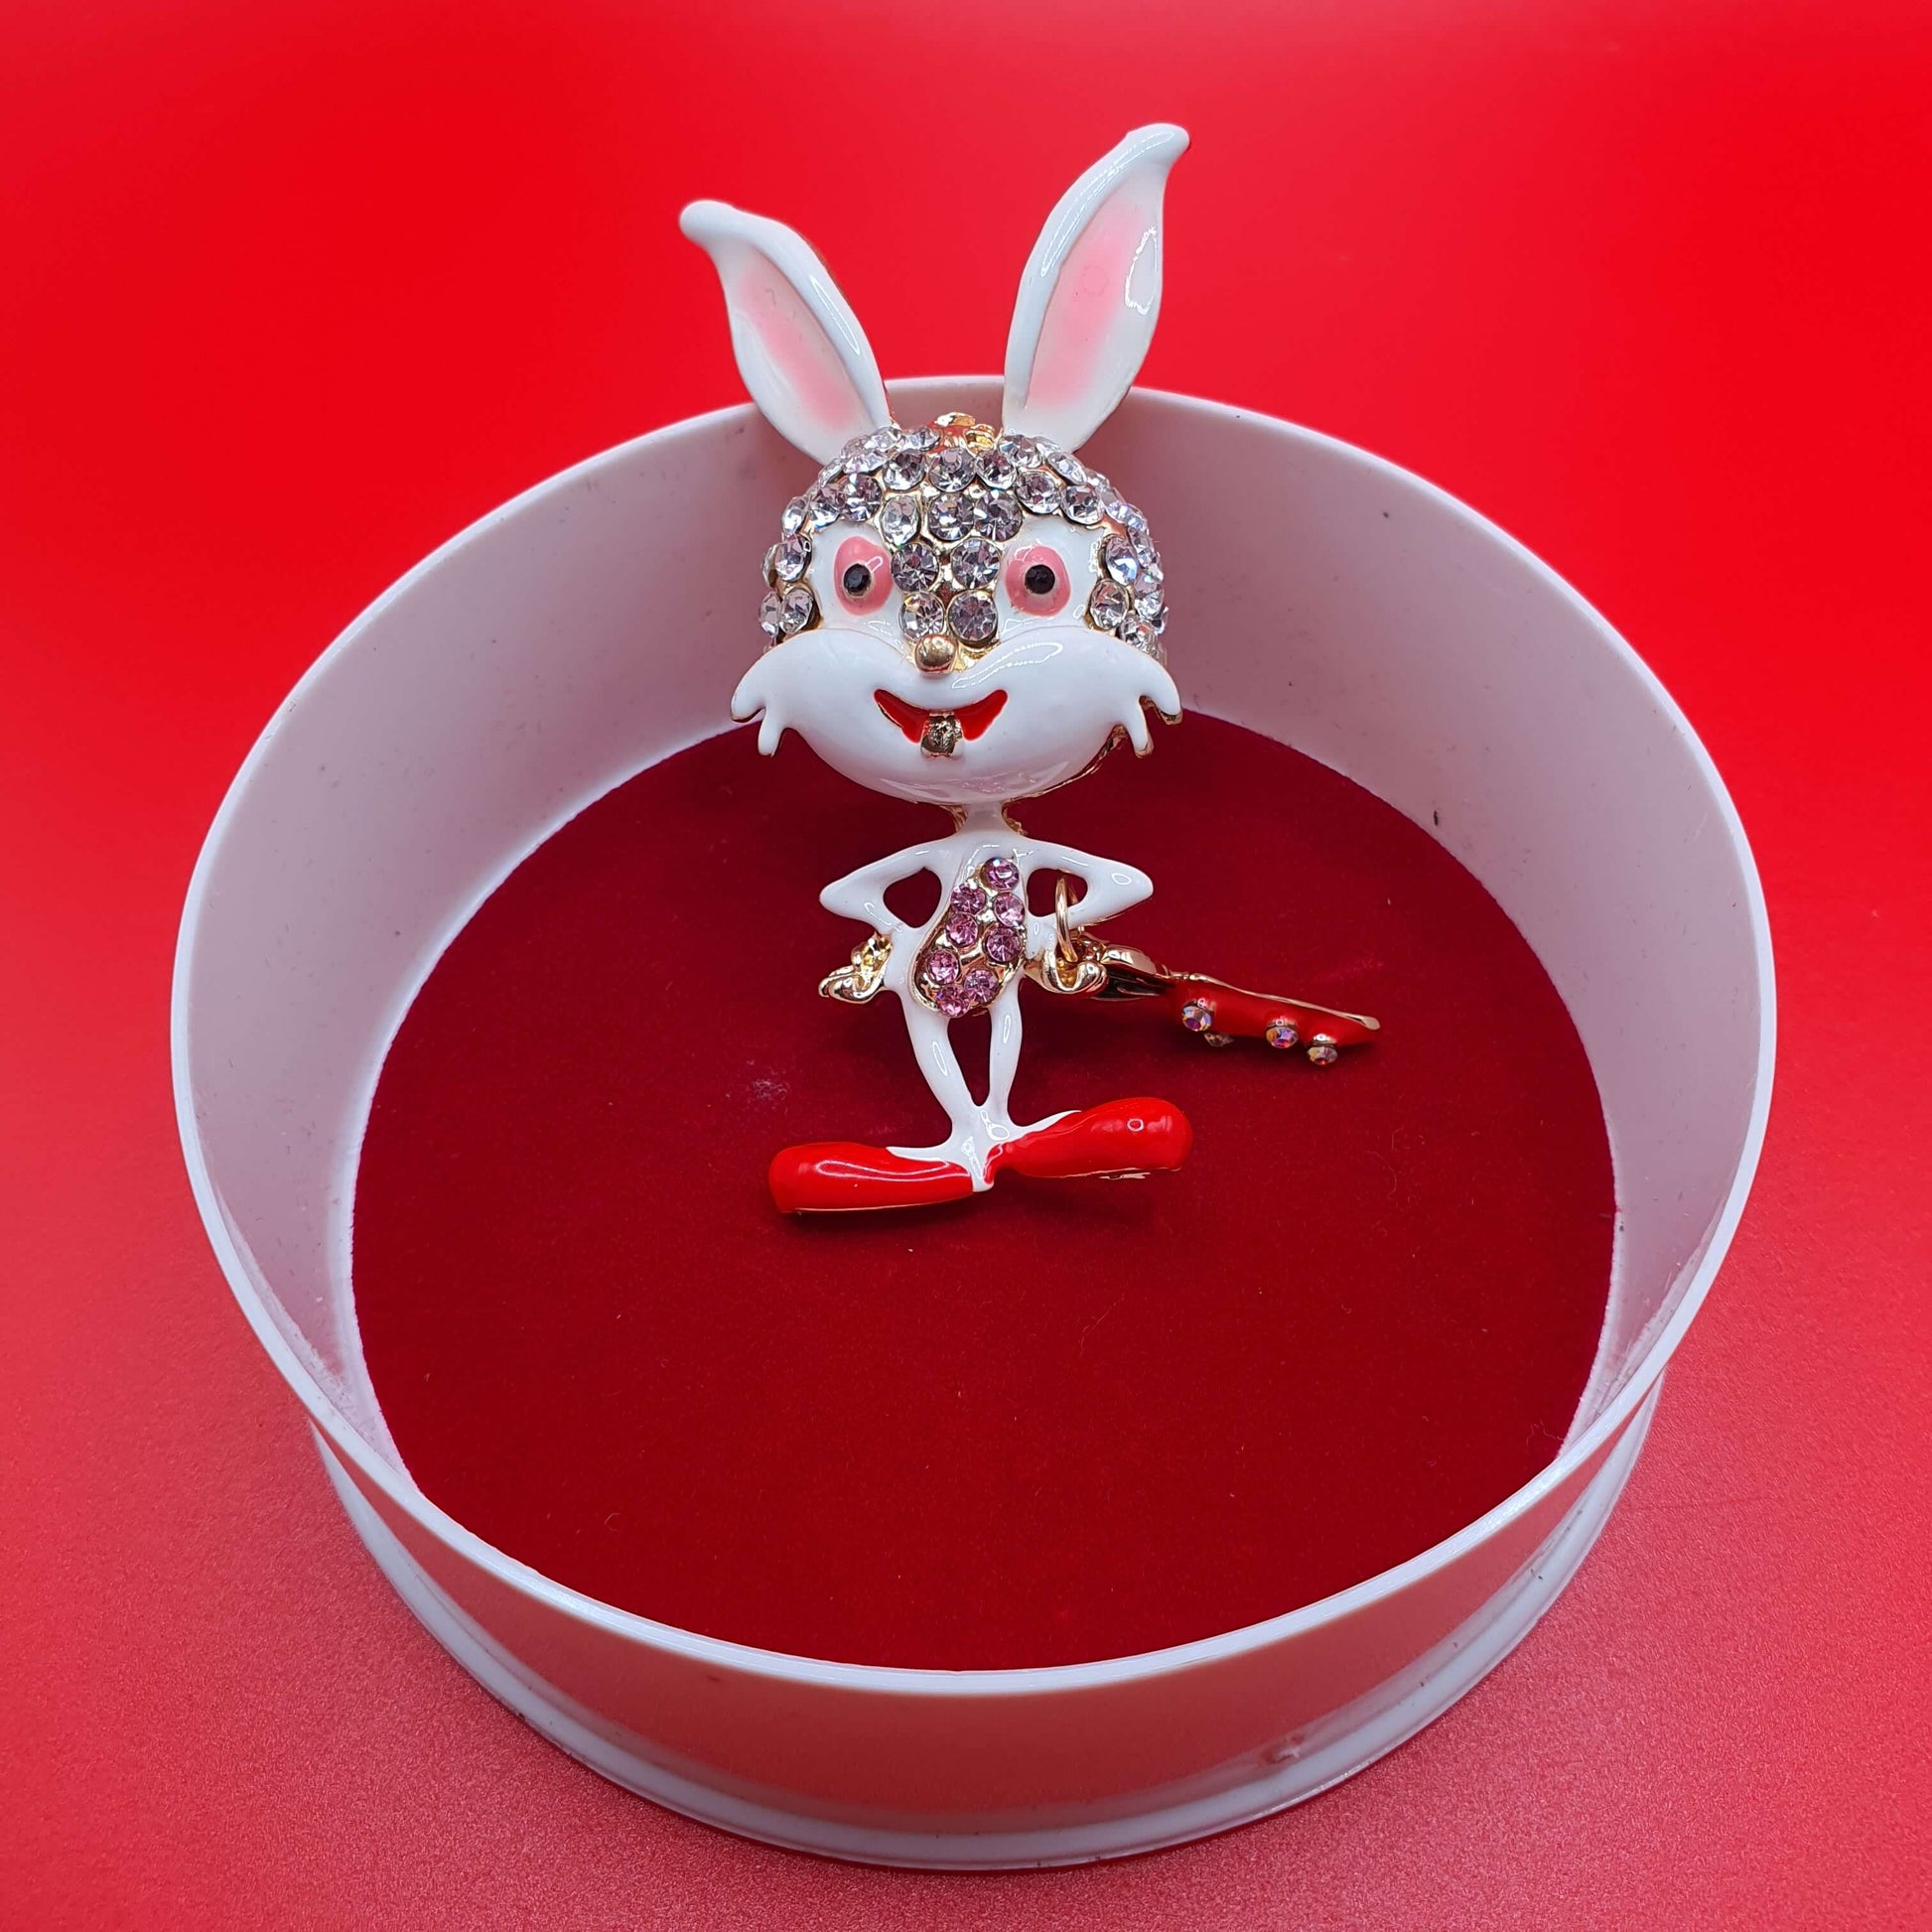 'Lunatic Rabbit Twins' brooches - Style's Bug 2 x White Rabbits